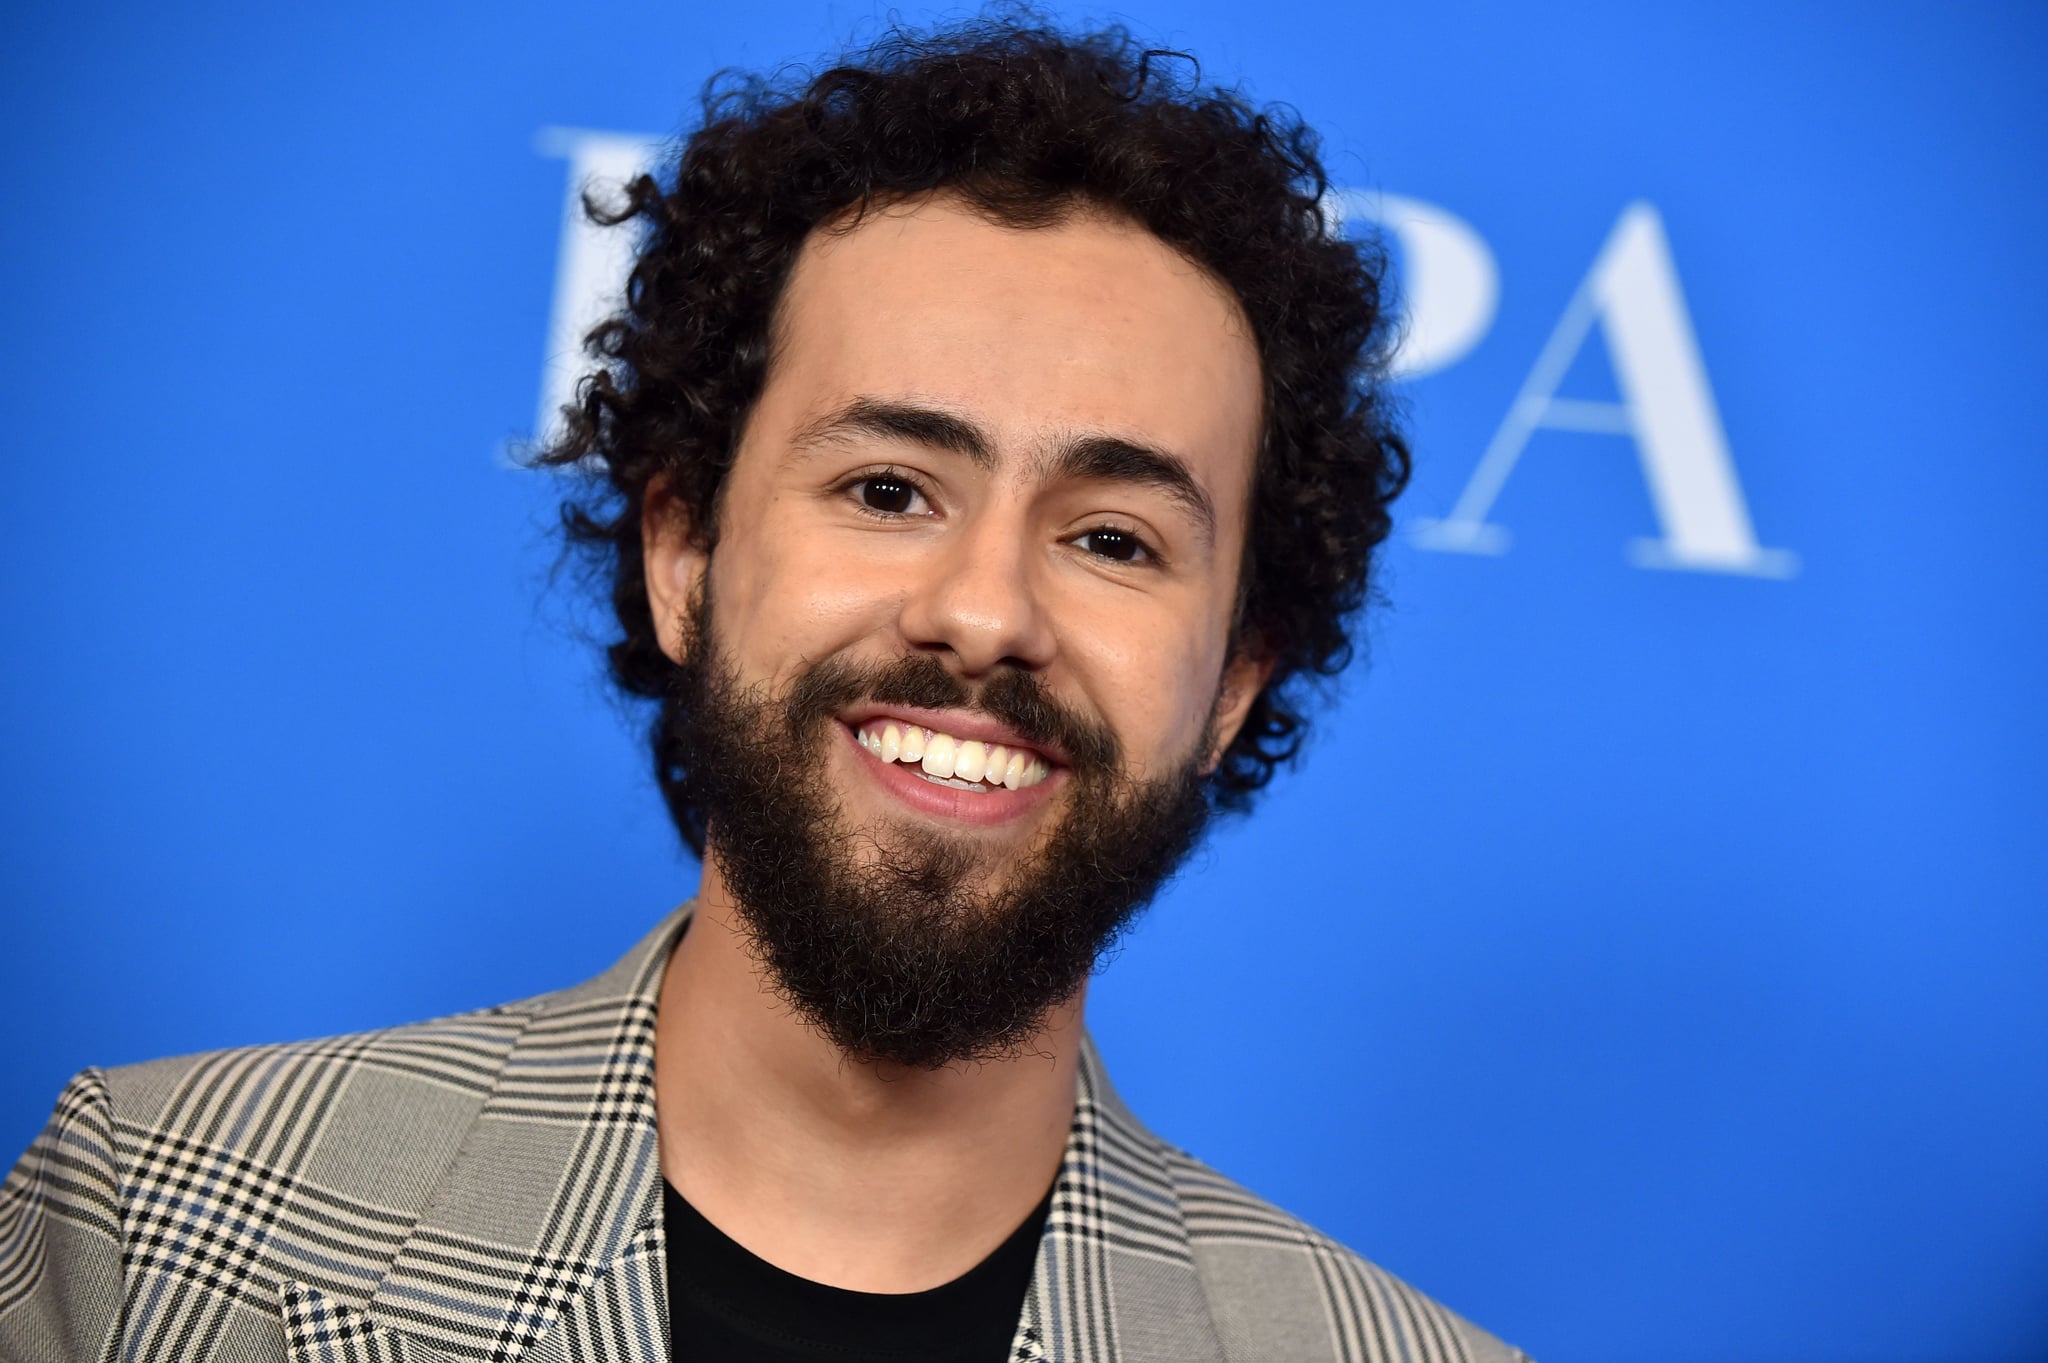 US comedian Ramy YOussef attends the Hollywood Foreign Press Association Annual Grants Banquet at The Beverly Wilshire, in Beverly Hills on July 31, 2019. (Photo by Lisa O'CONNOR / AFP)        (Photo credit should read LISA O'CONNOR/AFP via Getty Images)